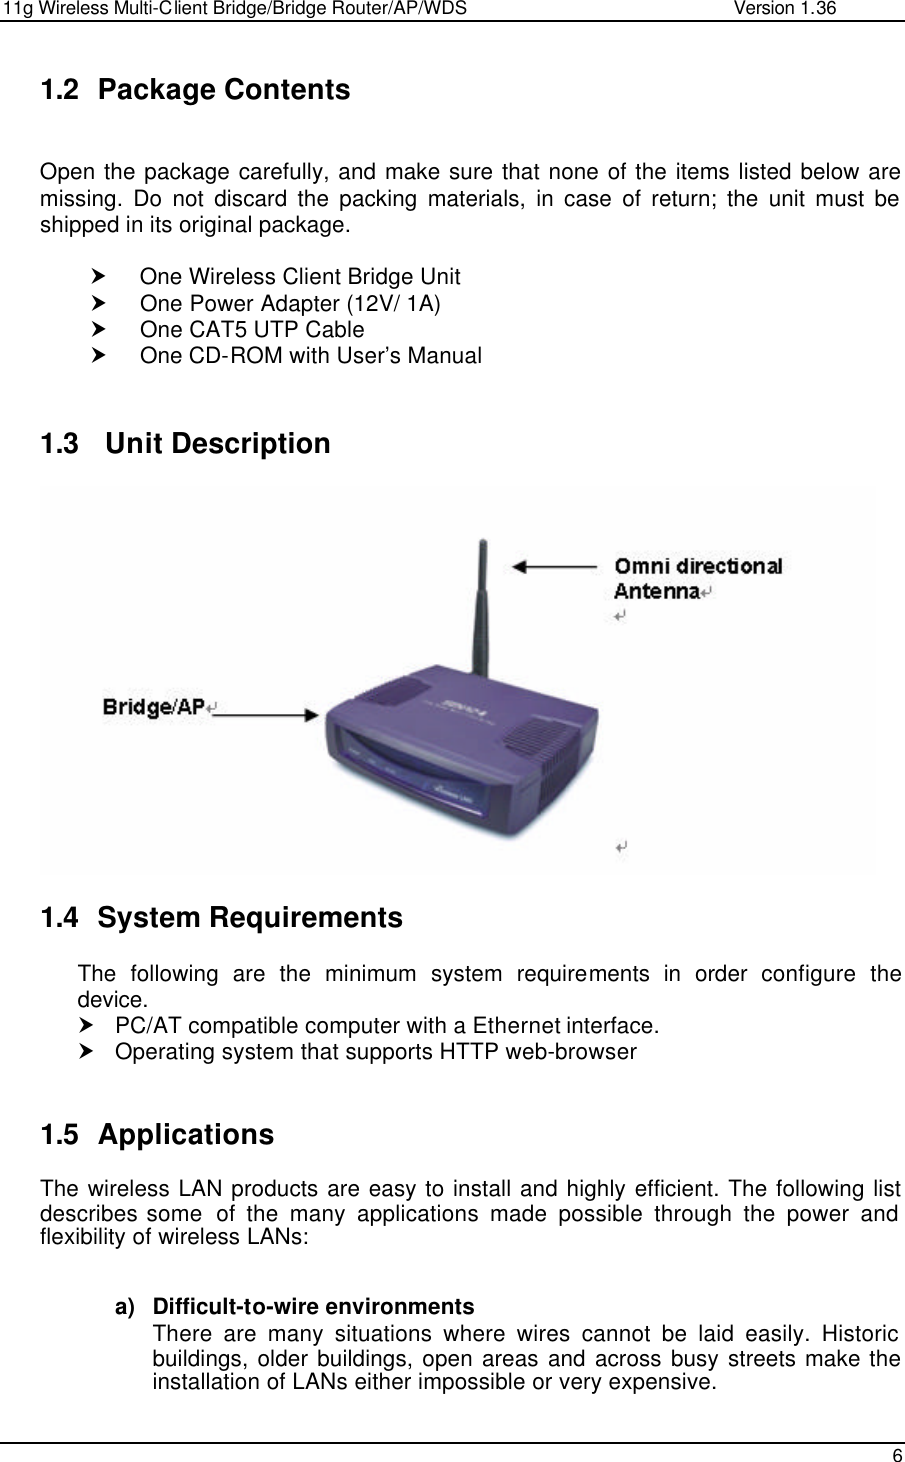 11g Wireless Multi-Client Bridge/Bridge Router/AP/WDS                                                   Version 1.36    6  1.2 Package Contents  Open the package carefully, and make sure that none of the items listed below are missing. Do not discard the packing materials, in case of return; the unit must be shipped in its original package.  † One Wireless Client Bridge Unit † One Power Adapter (12V/ 1A) † One CAT5 UTP Cable † One CD-ROM with User’s Manual   1.3  Unit Description   1.4 System Requirements The following are the minimum system requirements in order configure the device.  † PC/AT compatible computer with a Ethernet interface. † Operating system that supports HTTP web-browser   1.5 Applications The wireless LAN products are easy to install and highly efficient. The following list describes some  of the many applications made possible through the power and flexibility of wireless LANs:   a) Difficult-to-wire environments There are many situations where wires cannot be laid easily. Historic buildings, older buildings, open areas and across busy streets make the installation of LANs either impossible or very expensive. 